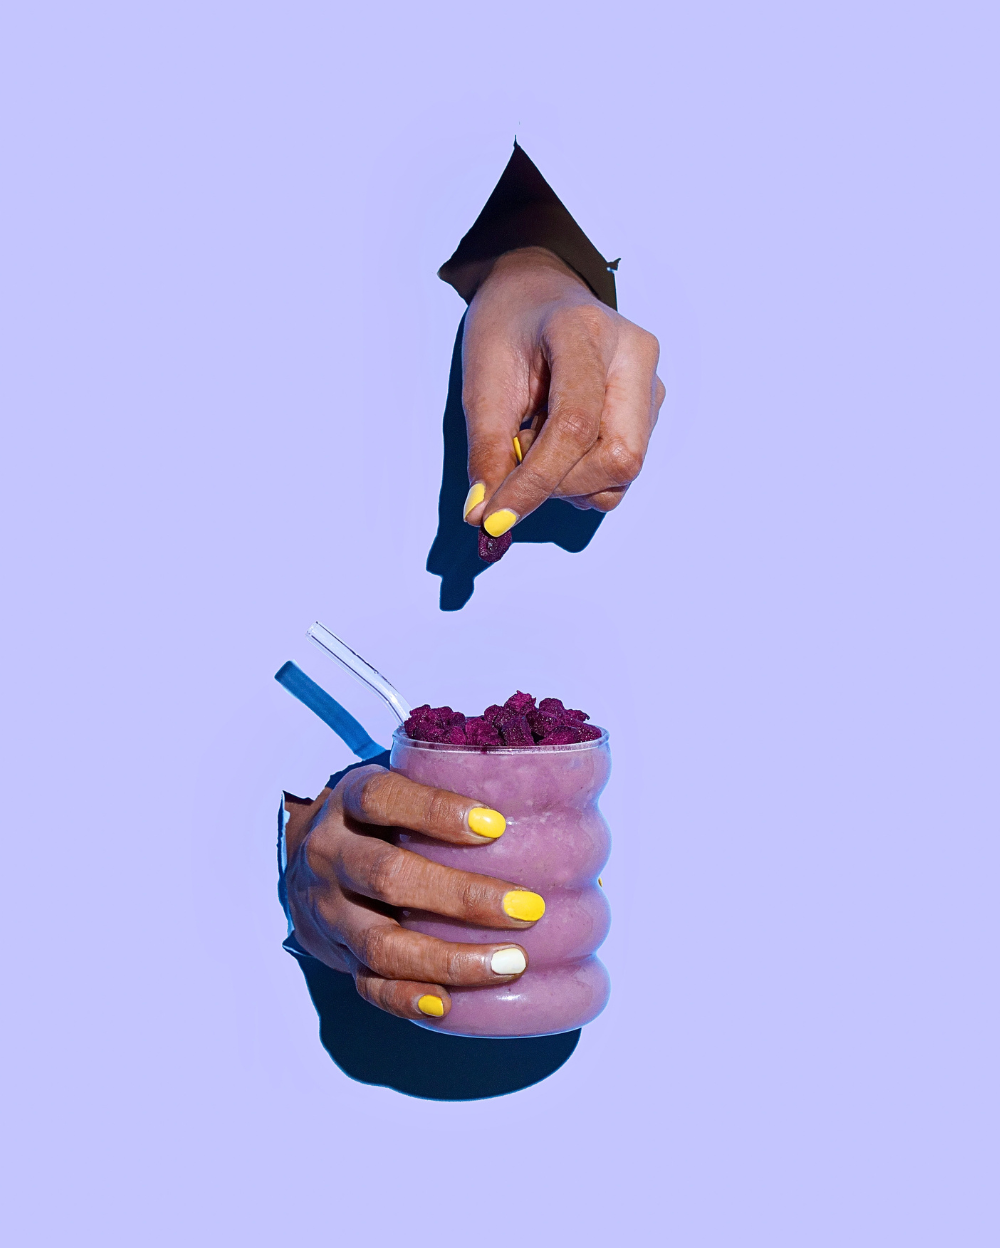 A hand with yellow-painted nails holding a glass filled with Moon Freeze Dried Pink Guava + Jamun Cubes smoothie topped with exotic snacks and berries, against a purple background.